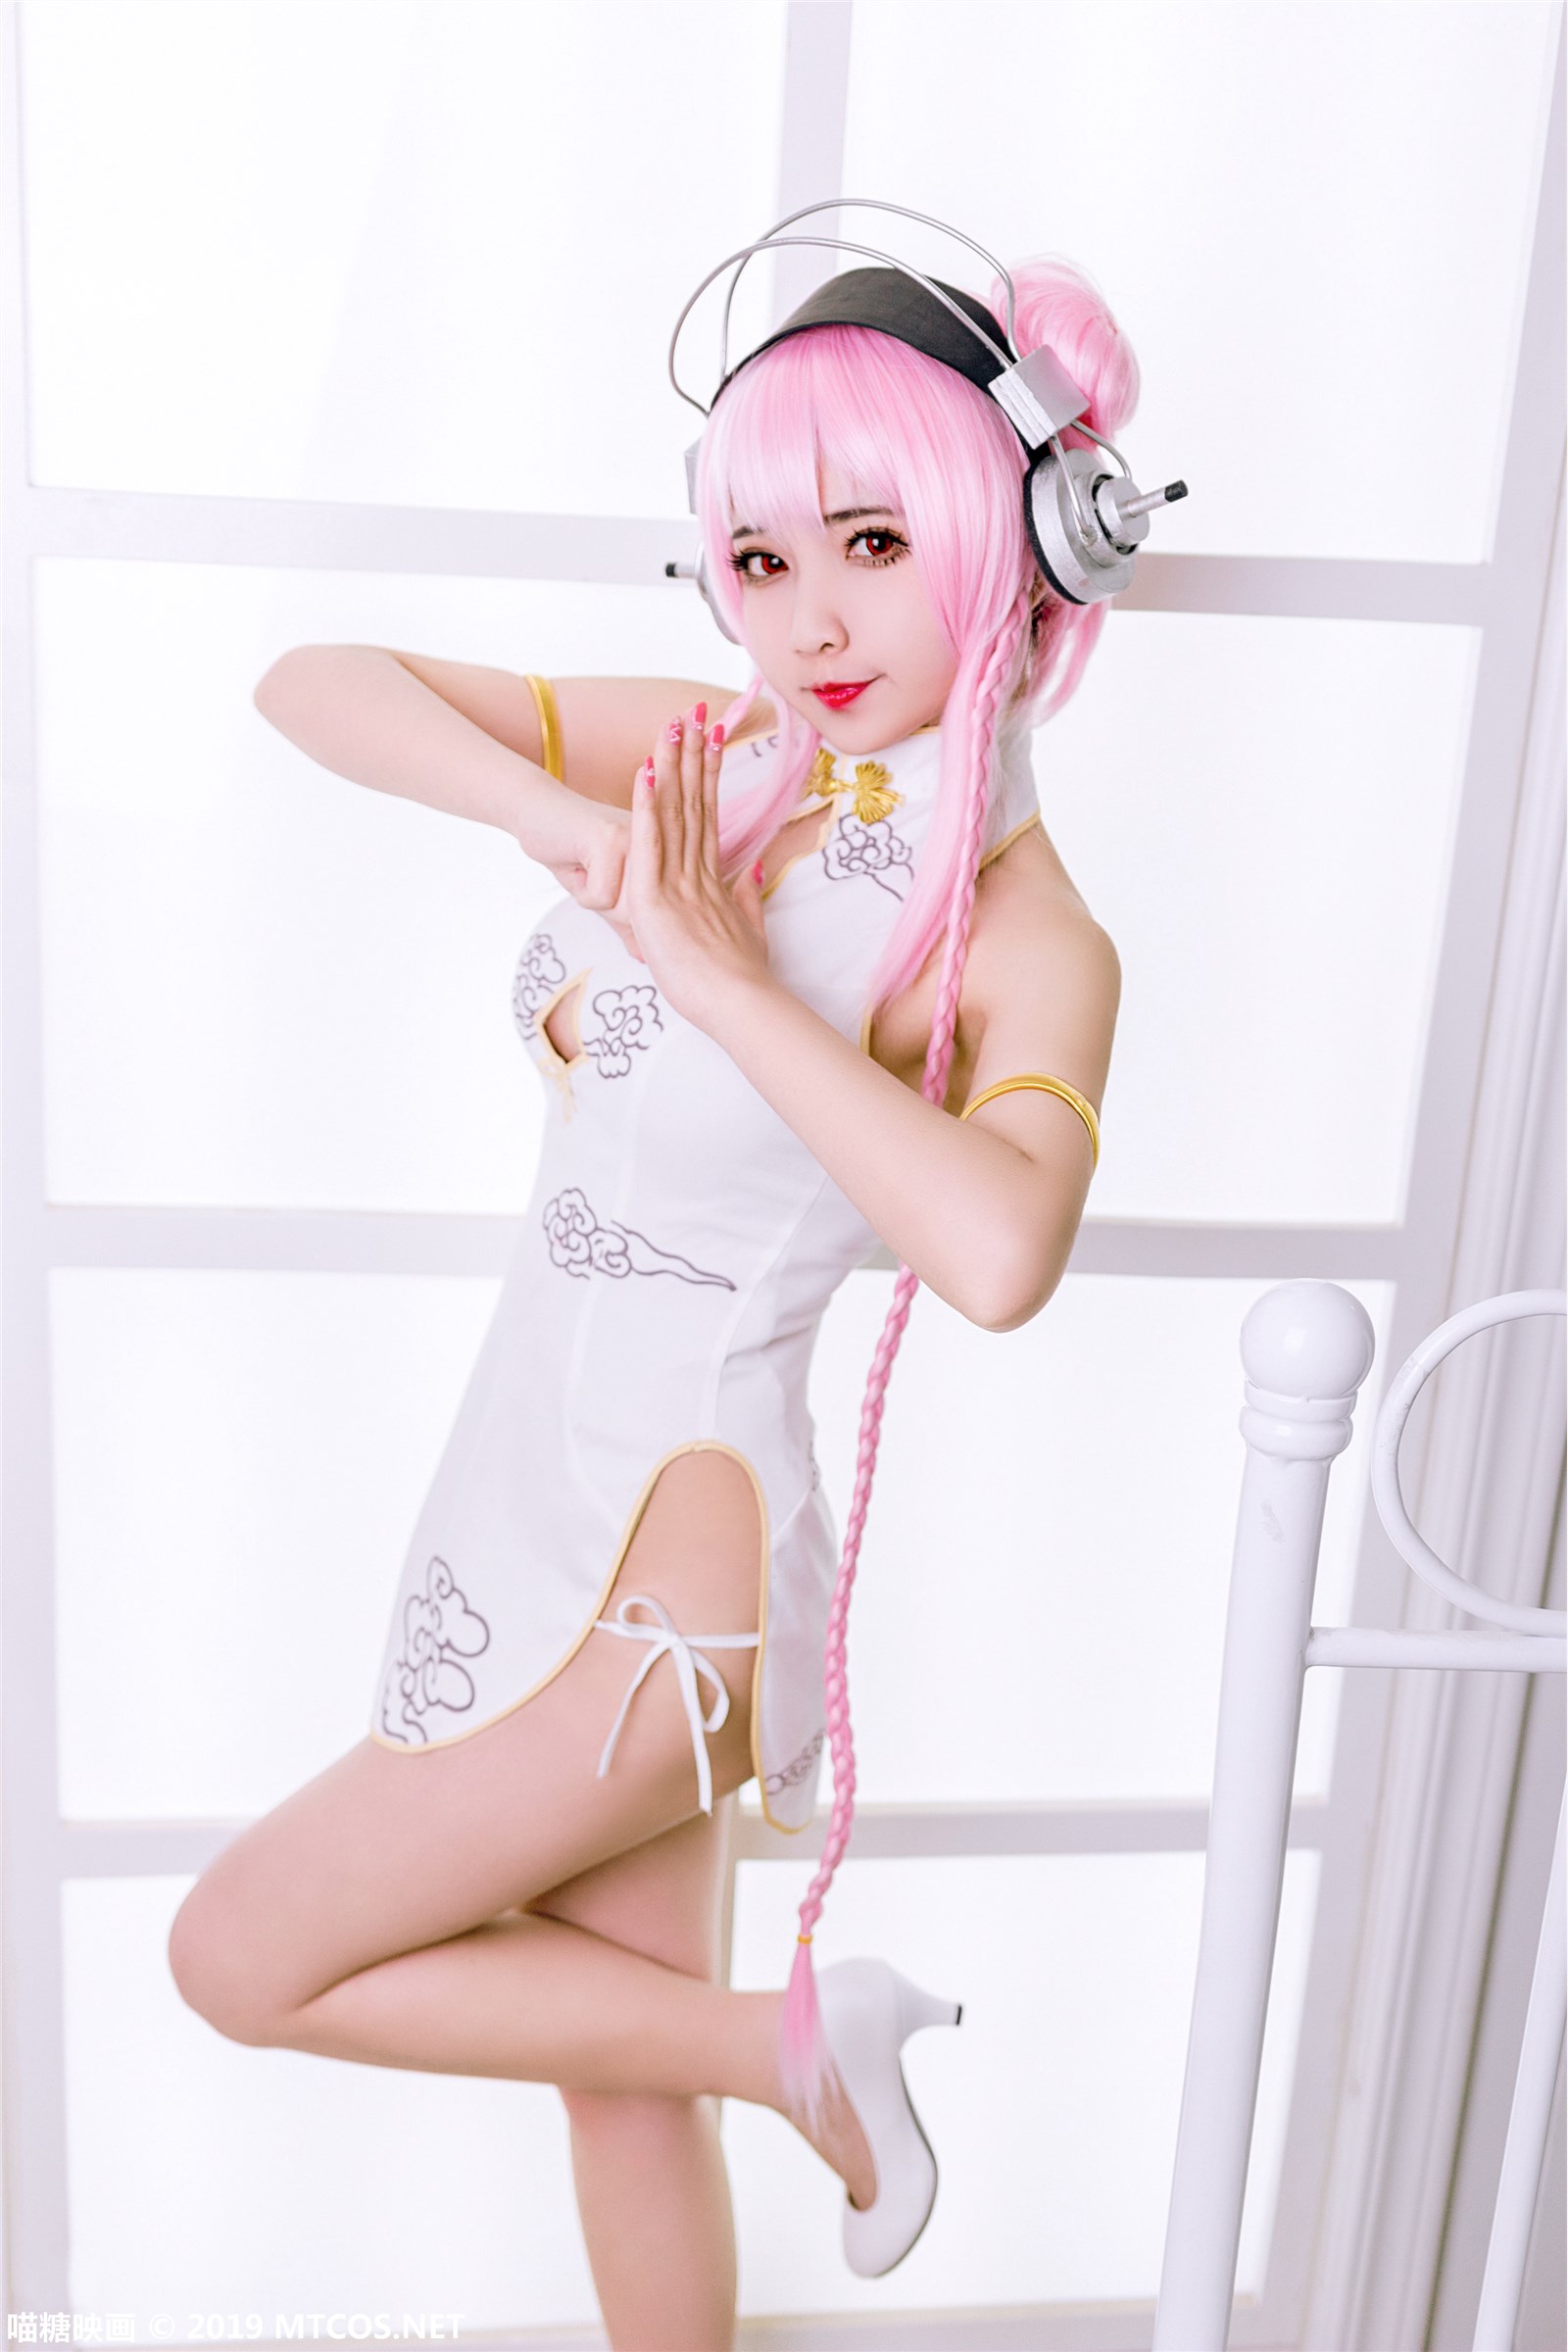 Meow sugar reflects the passion of Sony in Vol.050(8)